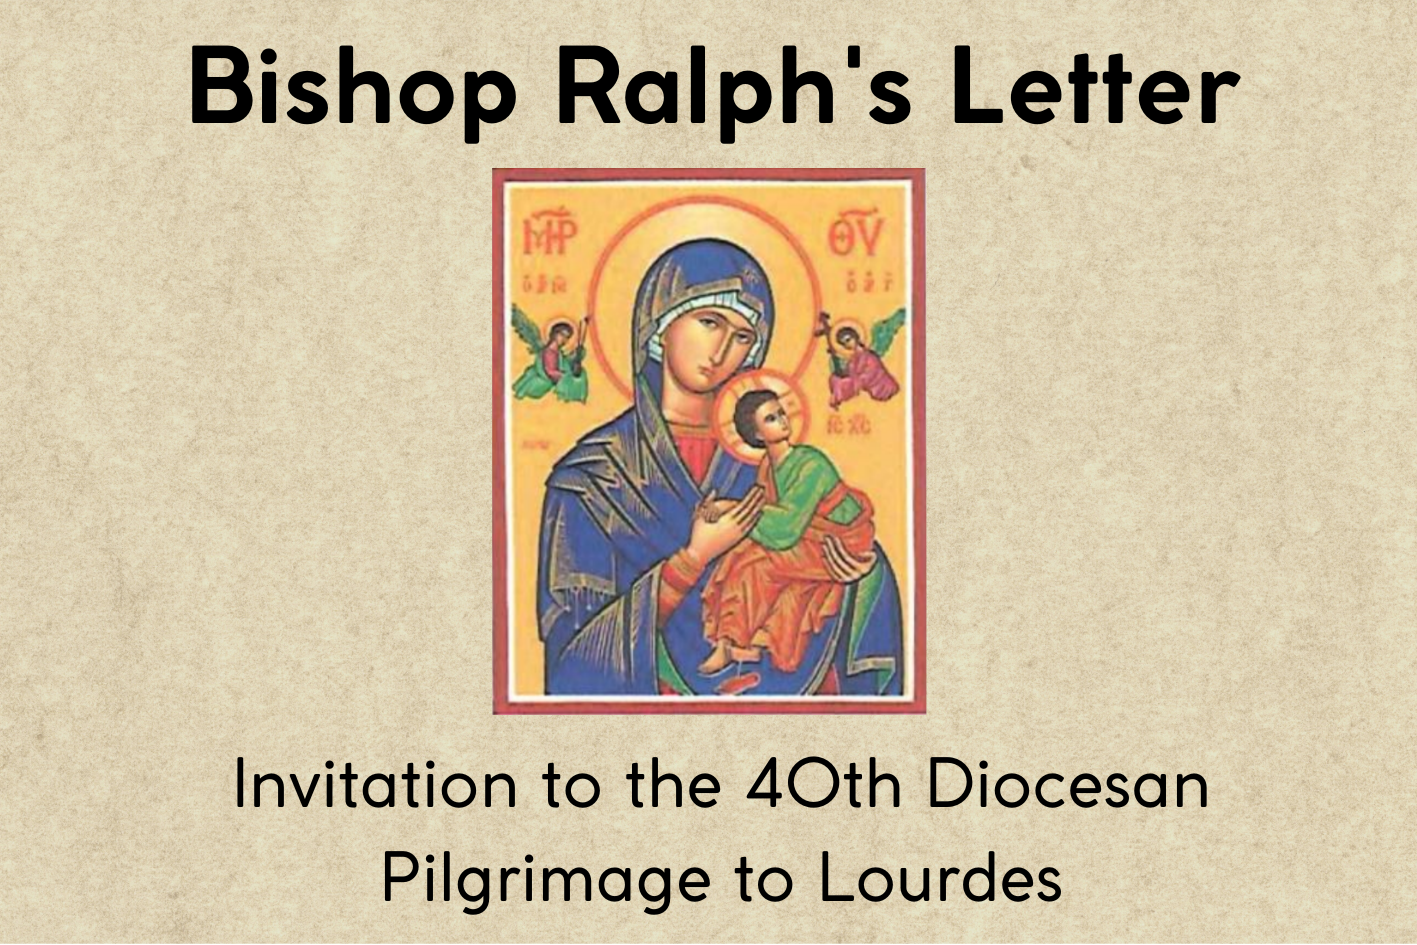 Bishop Ralph Letter of Invitation to the 40th Diocesan Pilgrimage to Lourdes